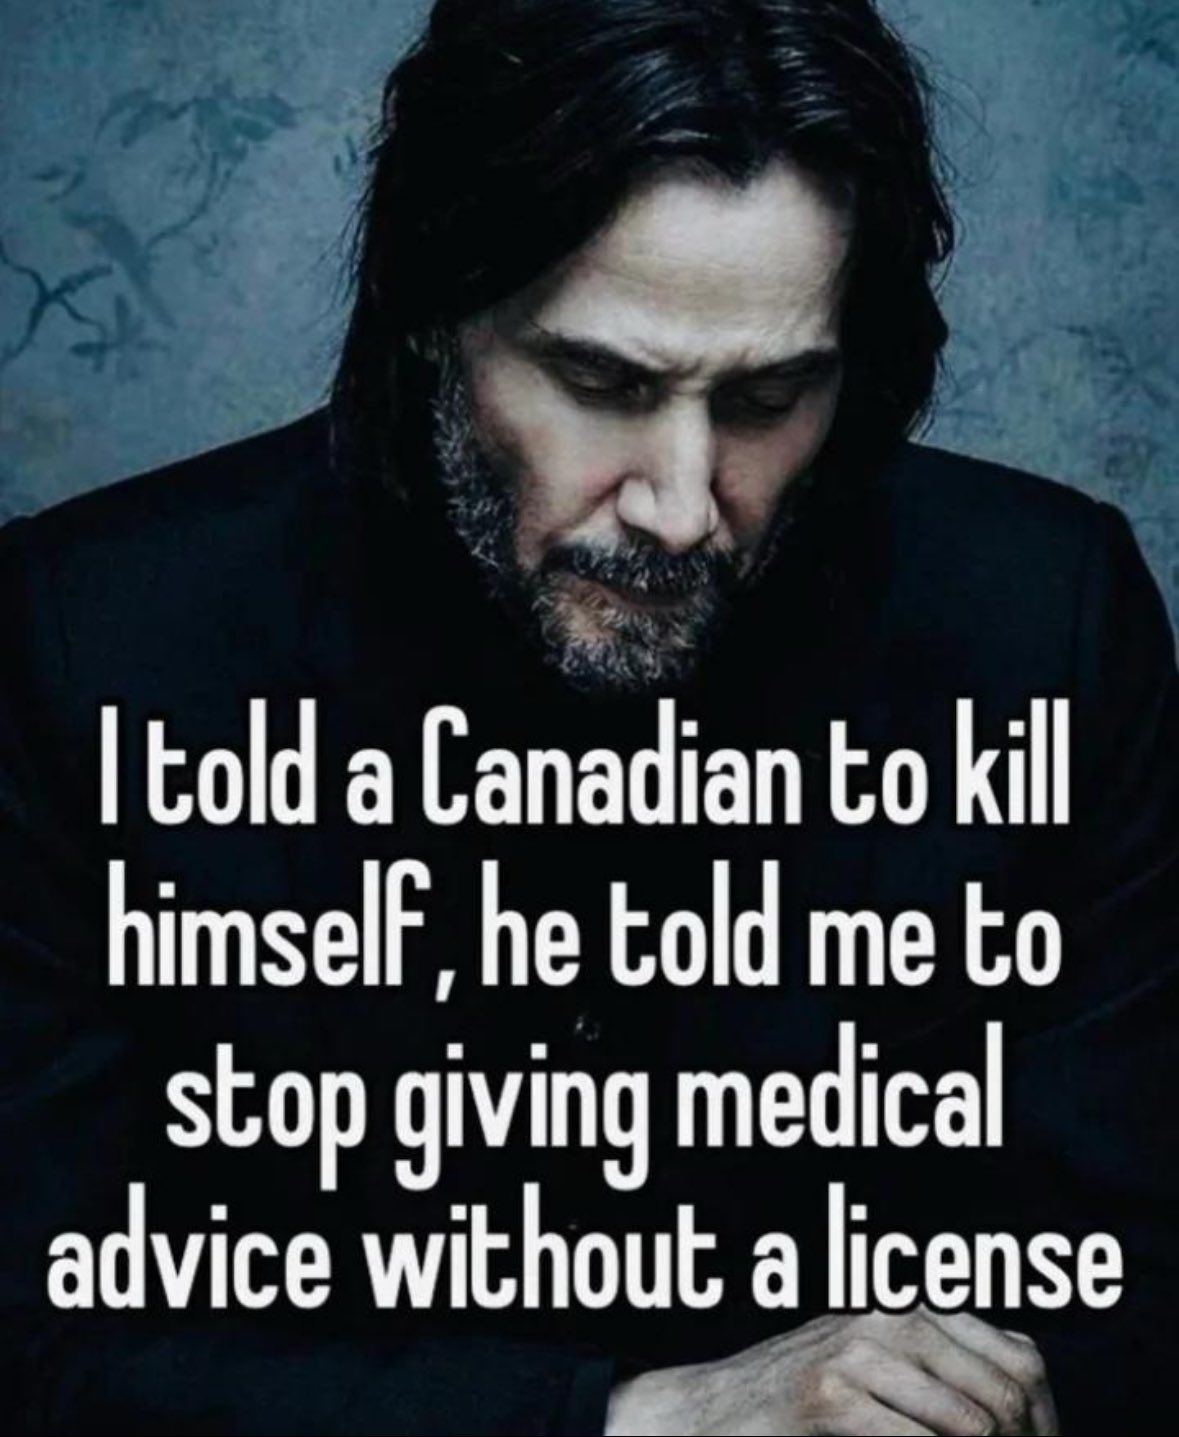 Mr Trudeau has a point